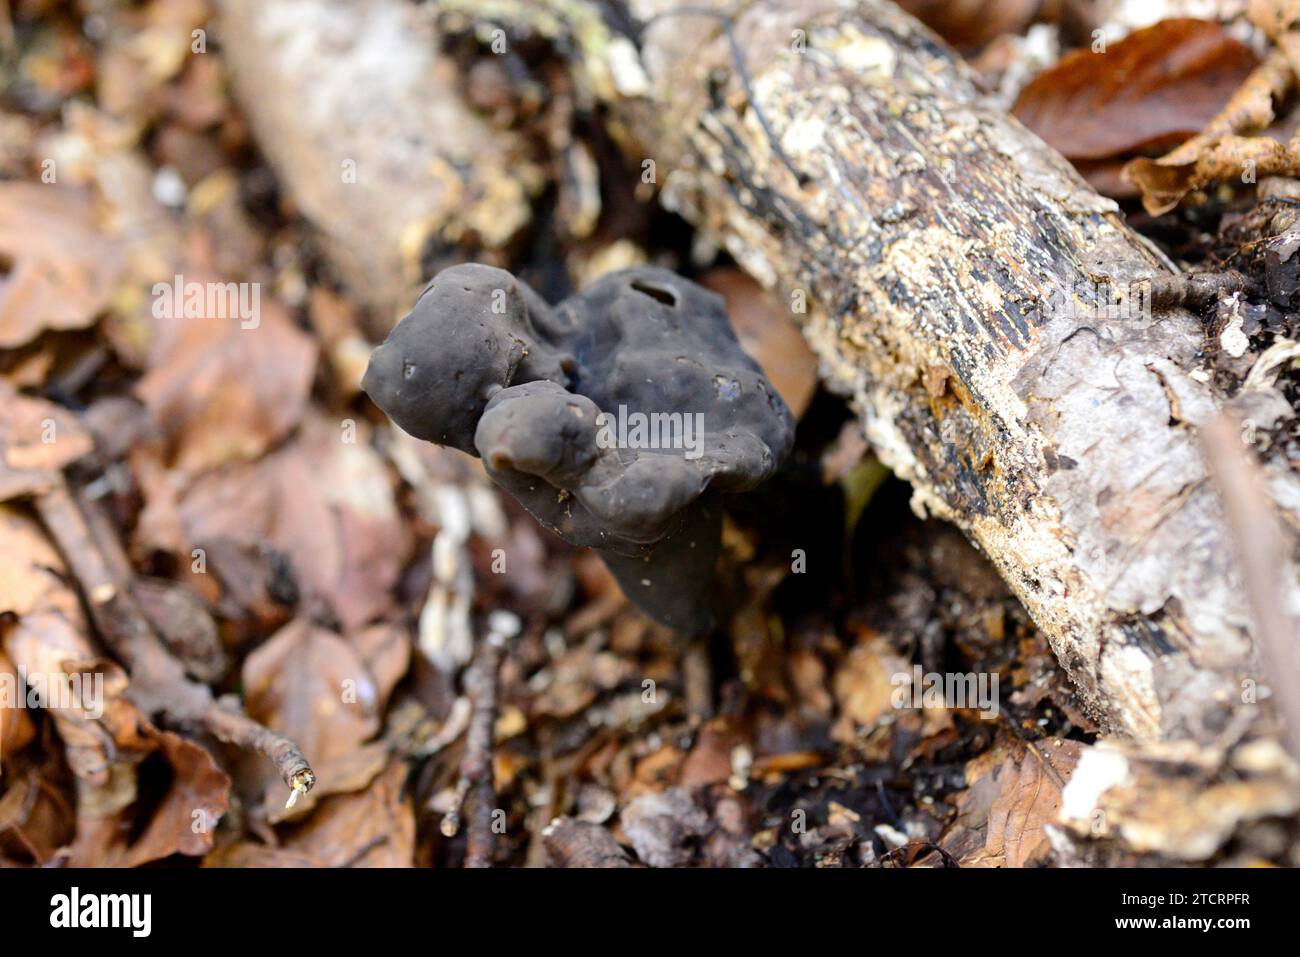 Elfin saddle or slate grey saddle (Helvella lacunosa) is an edible mushroom; it is consumed well-done but is not recommended. This photo was taken in Stock Photo